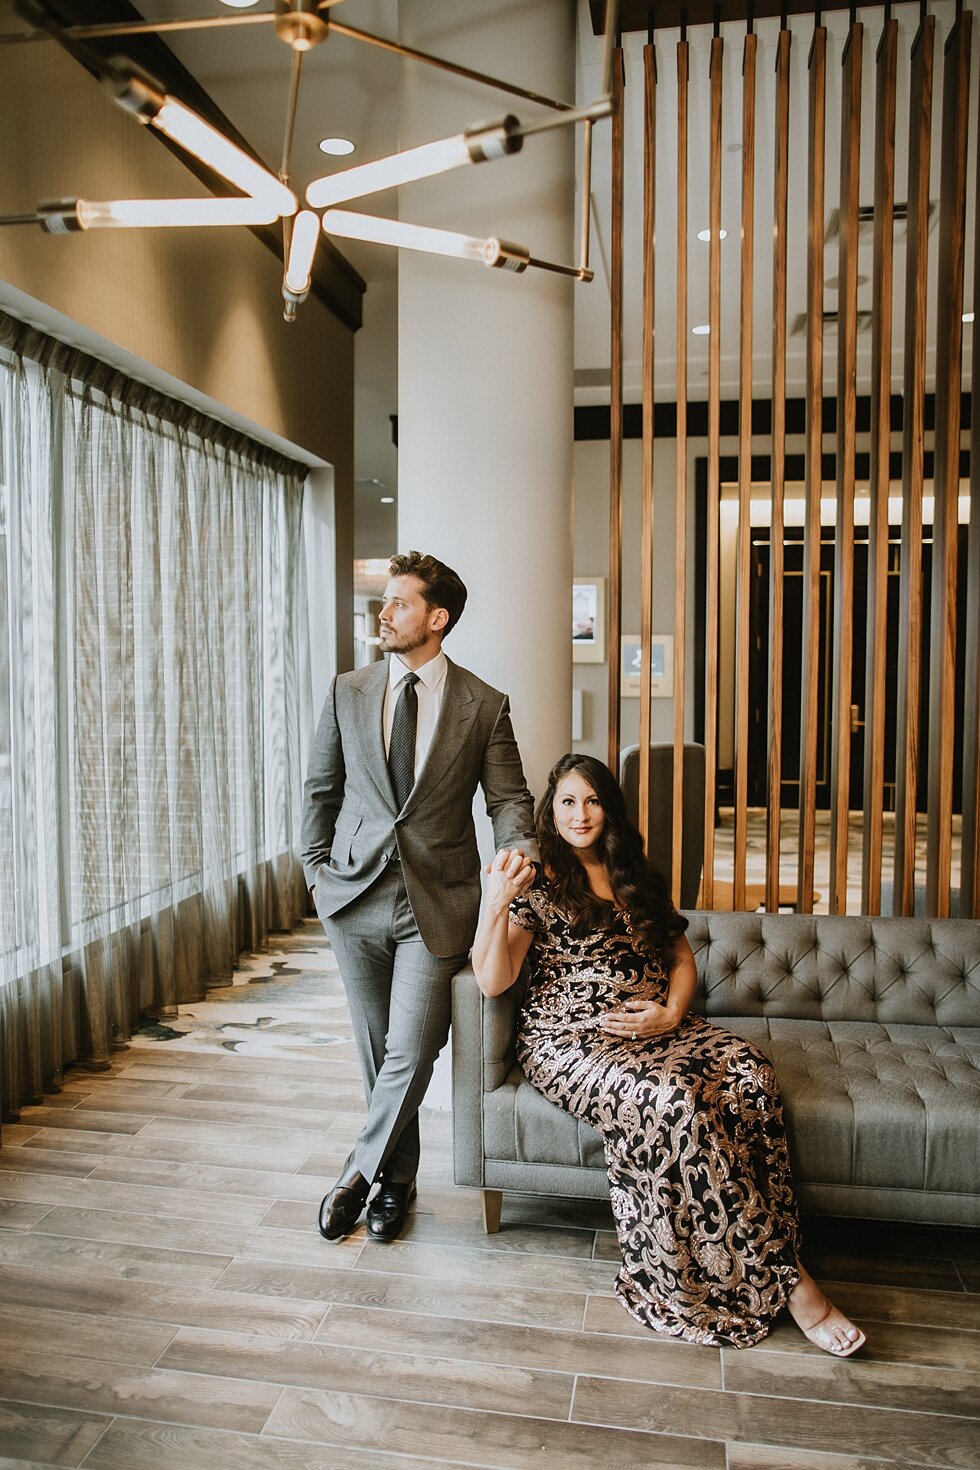  Formal elegant maternity session in Louisville, Kentucky for a couple that has all the grace and sophistication required to step into their roles as mom and dad. #maternitygoals #maternityphotographer #babybump #kentuckyphotographer #fancymaternitys